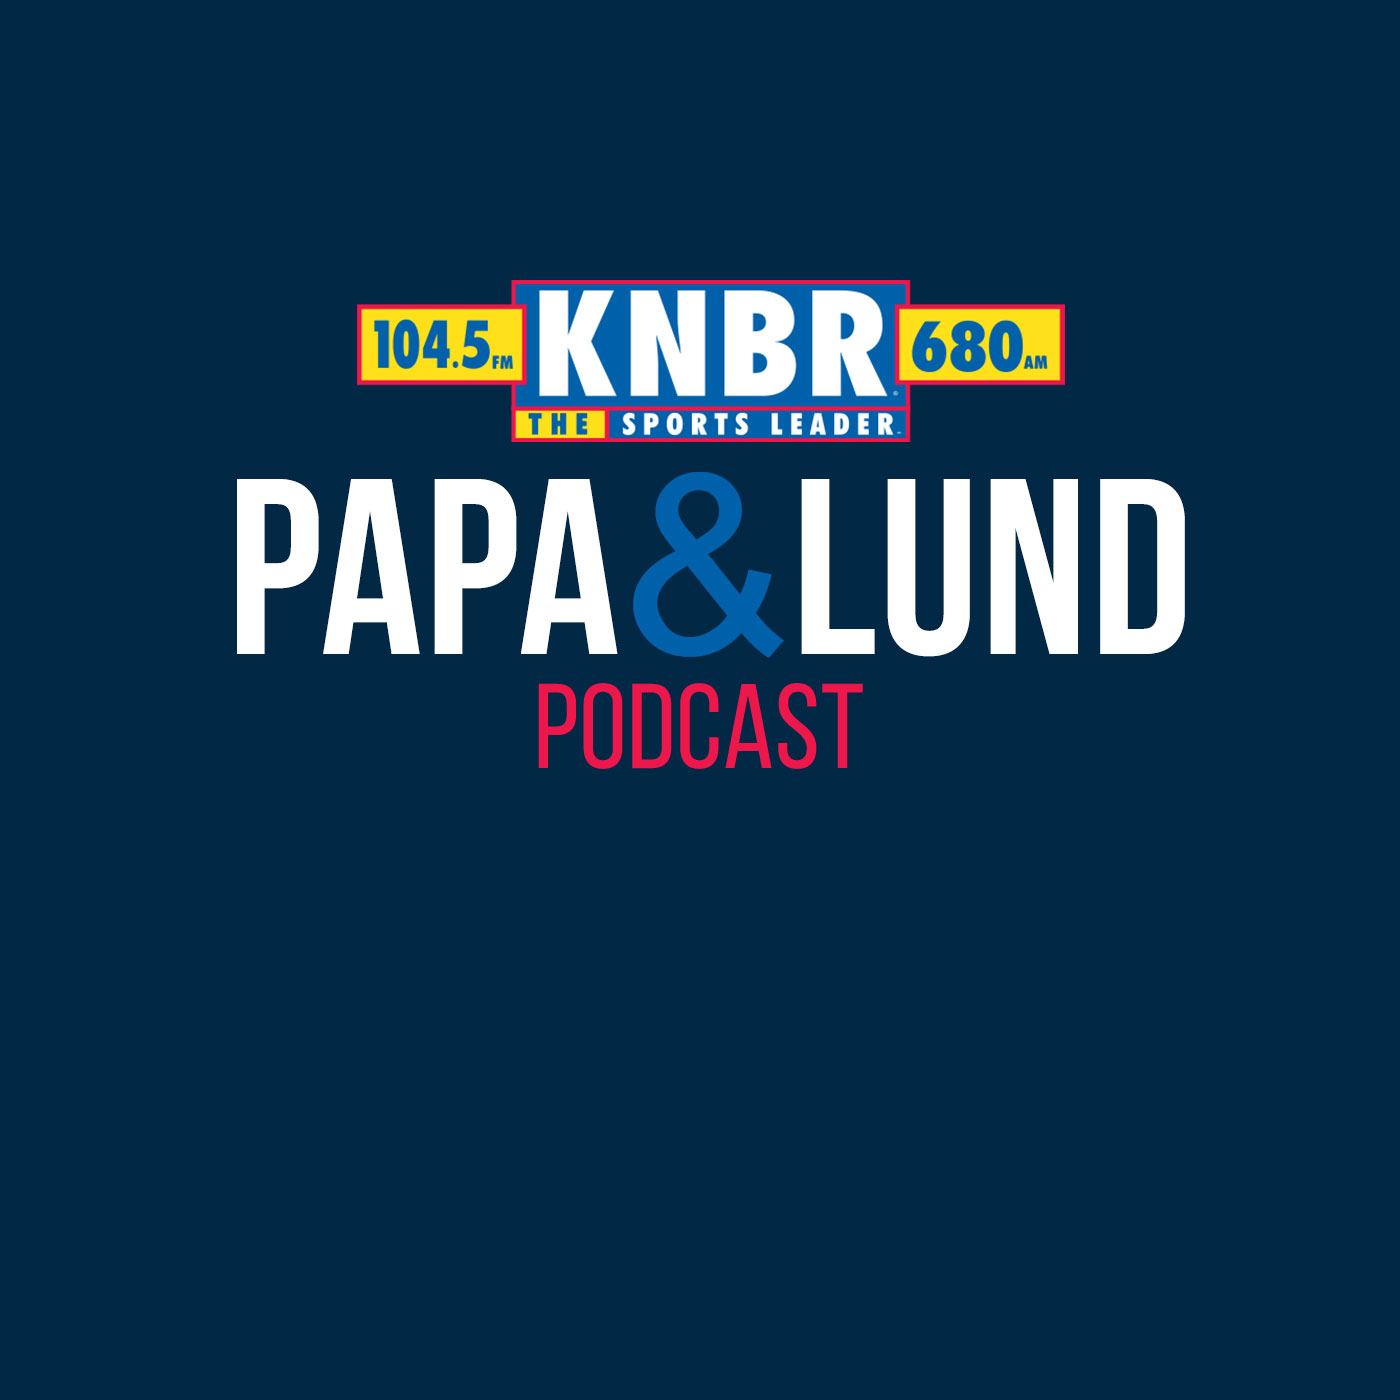 12-8 Hugh Douglas joins Papa & Lund to recap the Niners beatdown of the Eagles last week, and he also previews Philly's huge game against Dallas